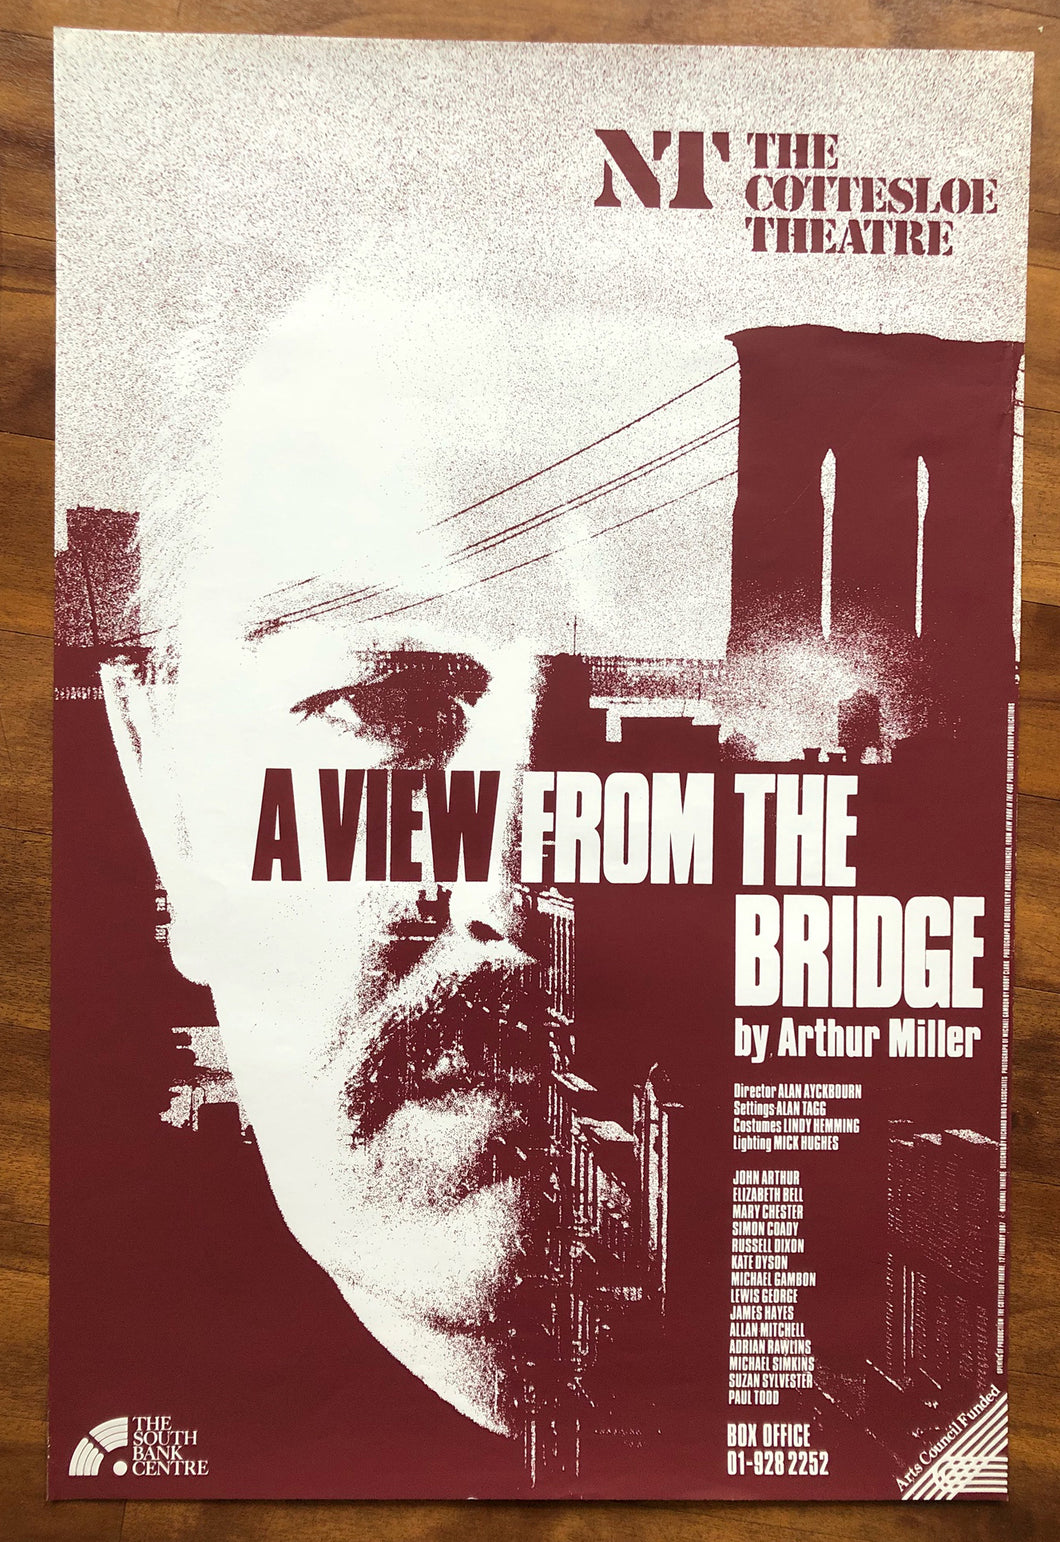 A View From The Bridge, 1987